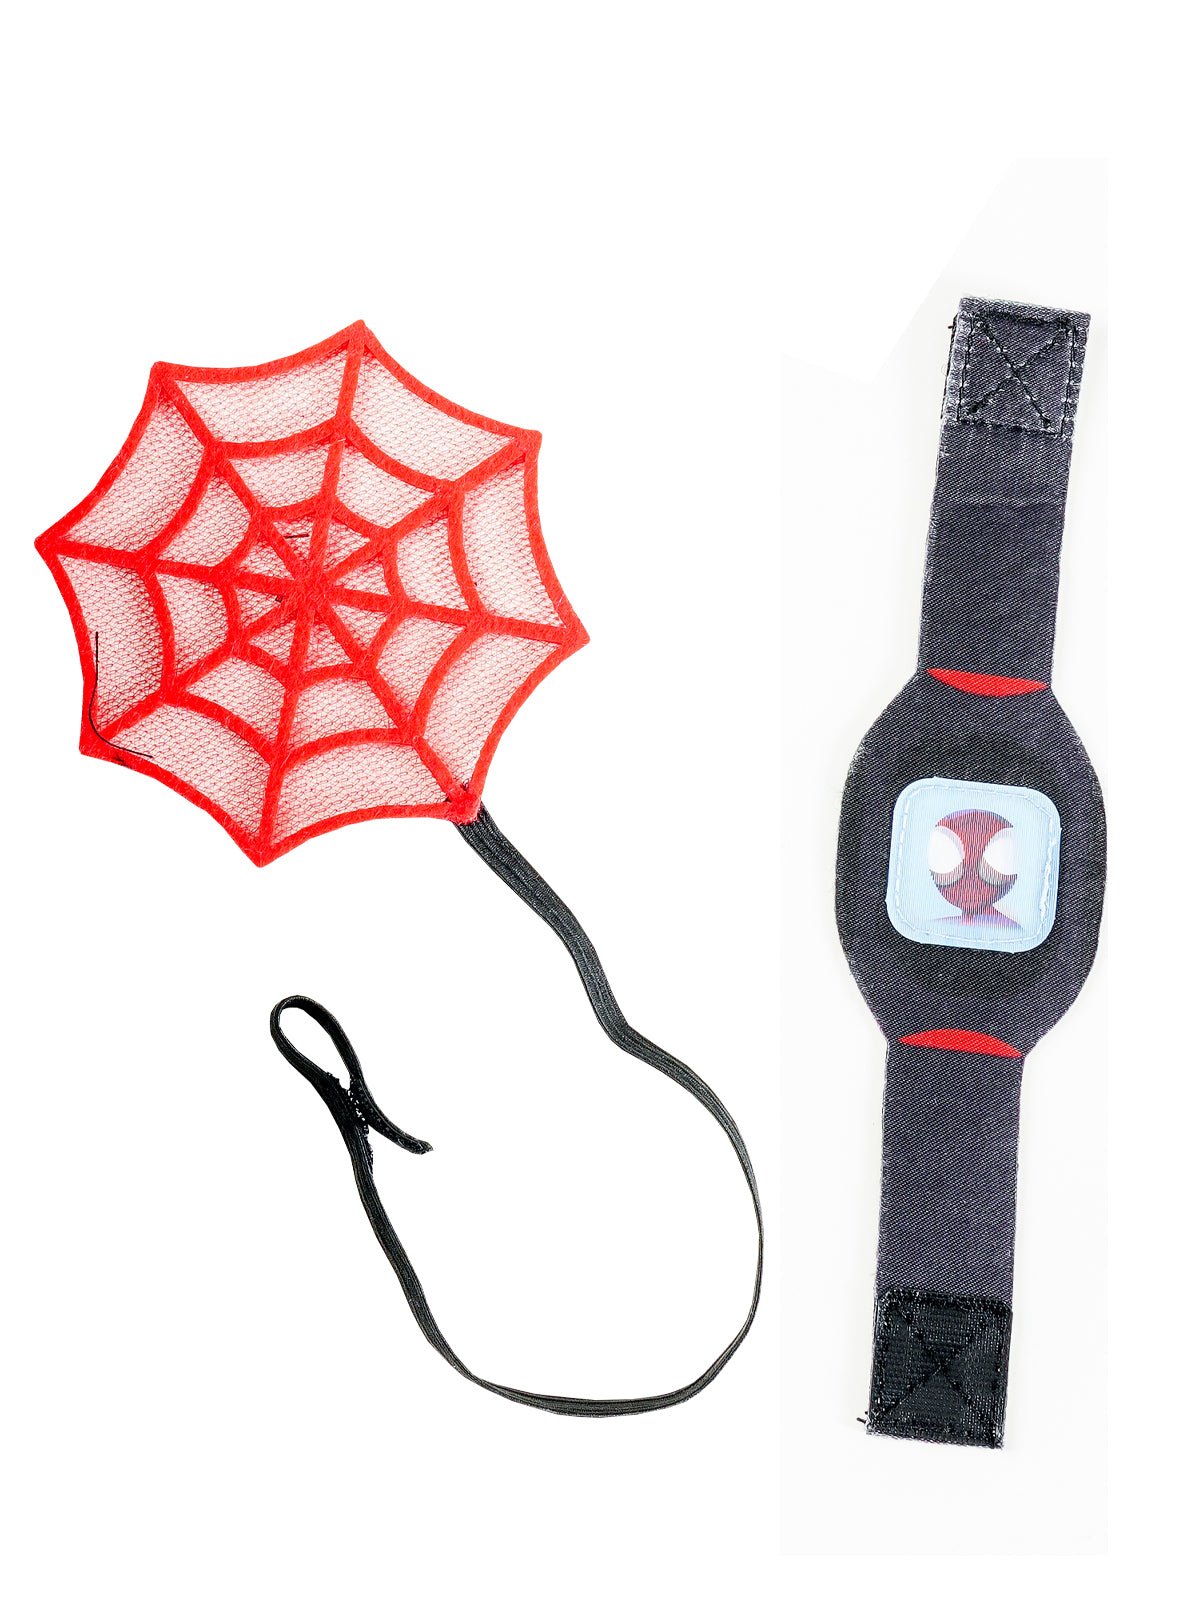 Watch and web sling close up view - Kids Miles Morales Spider Accessory Kit